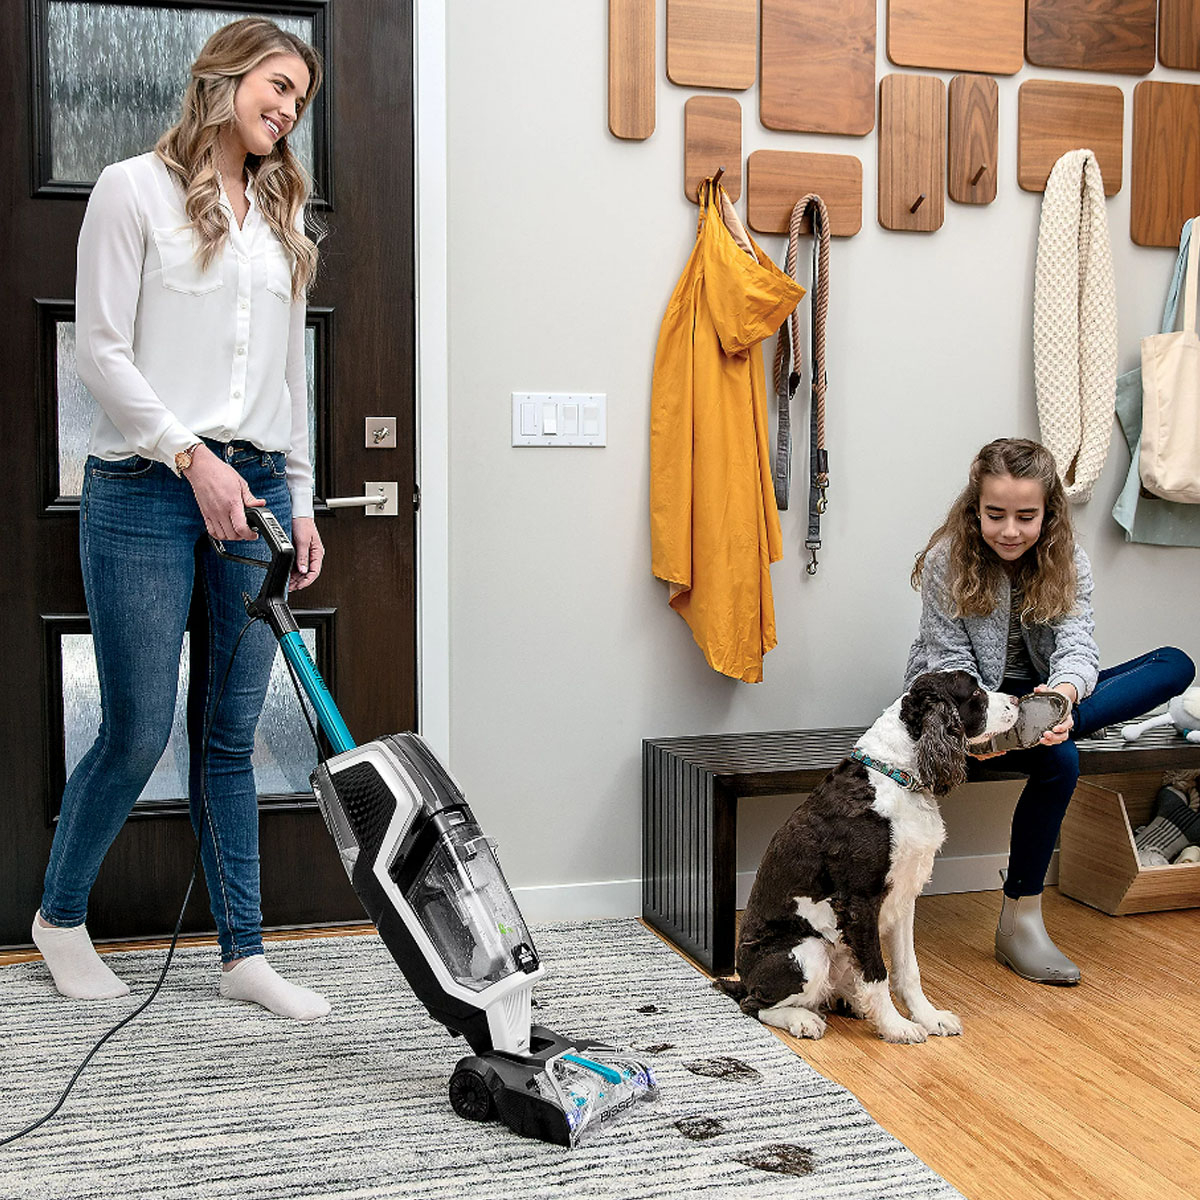 The Bissell JetScrub Carpet & Rug Cleaner System Is $200 Today Only